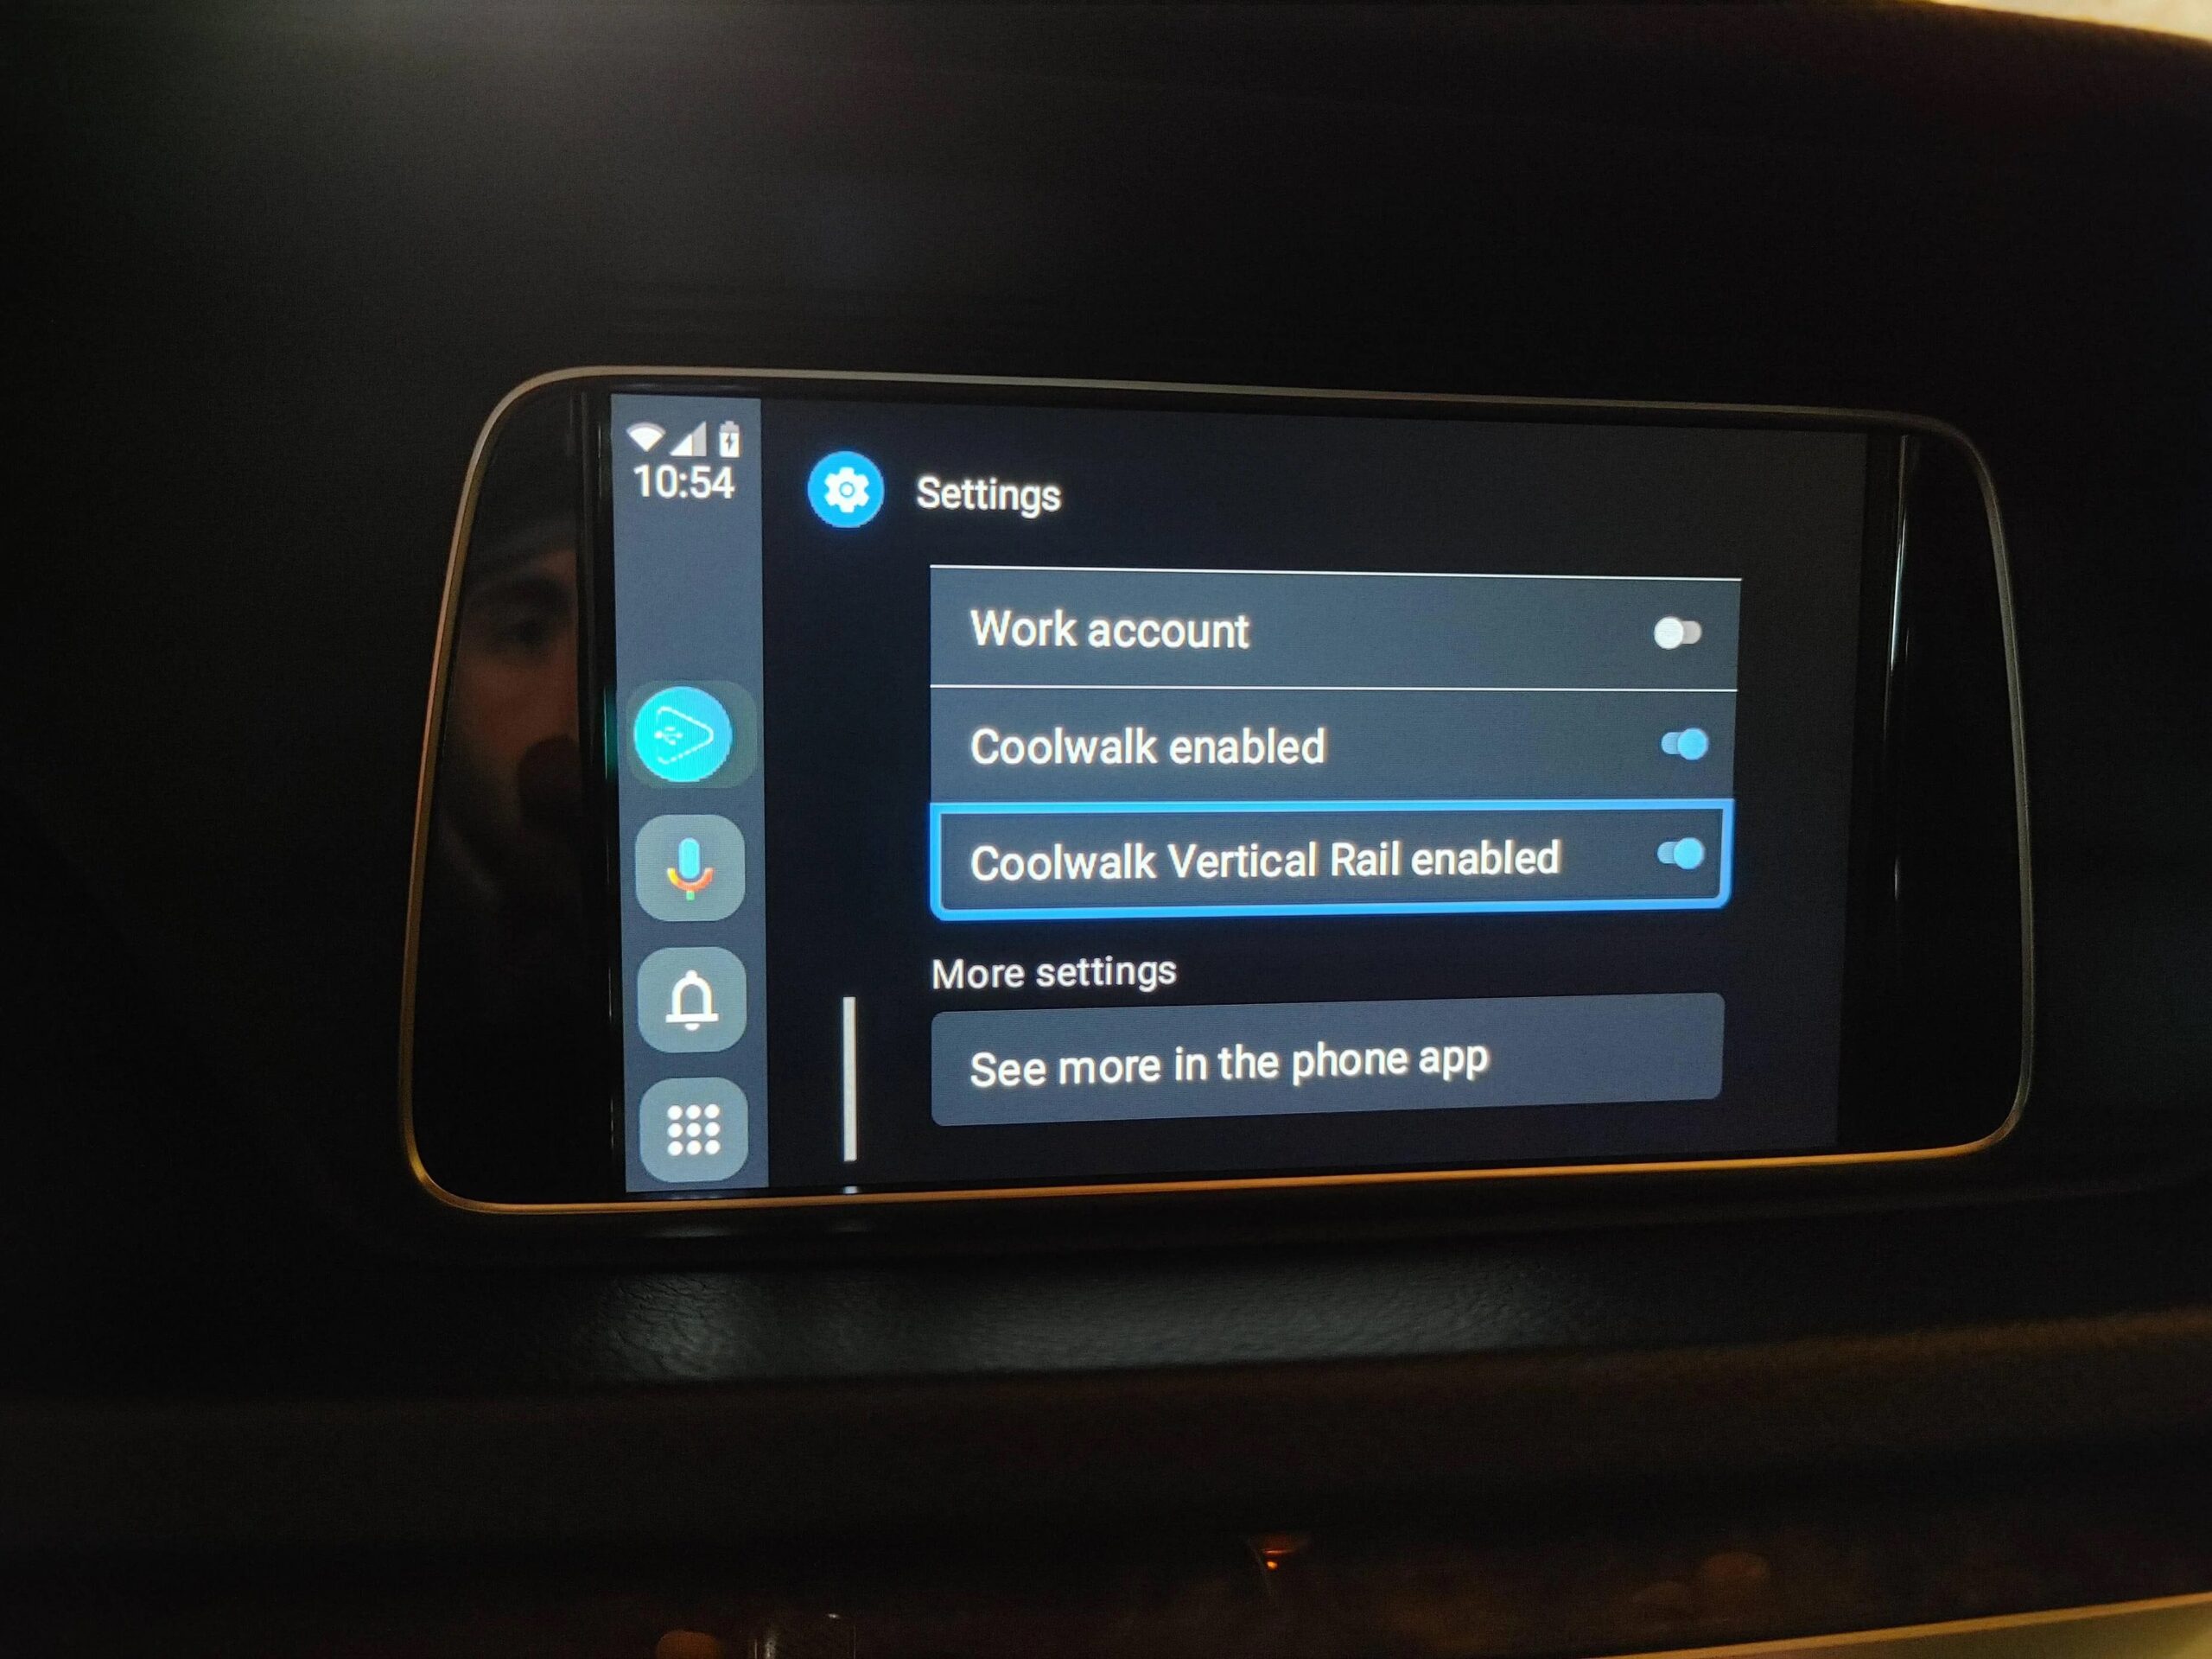 Android Auto Coolwalk Vertical Rail